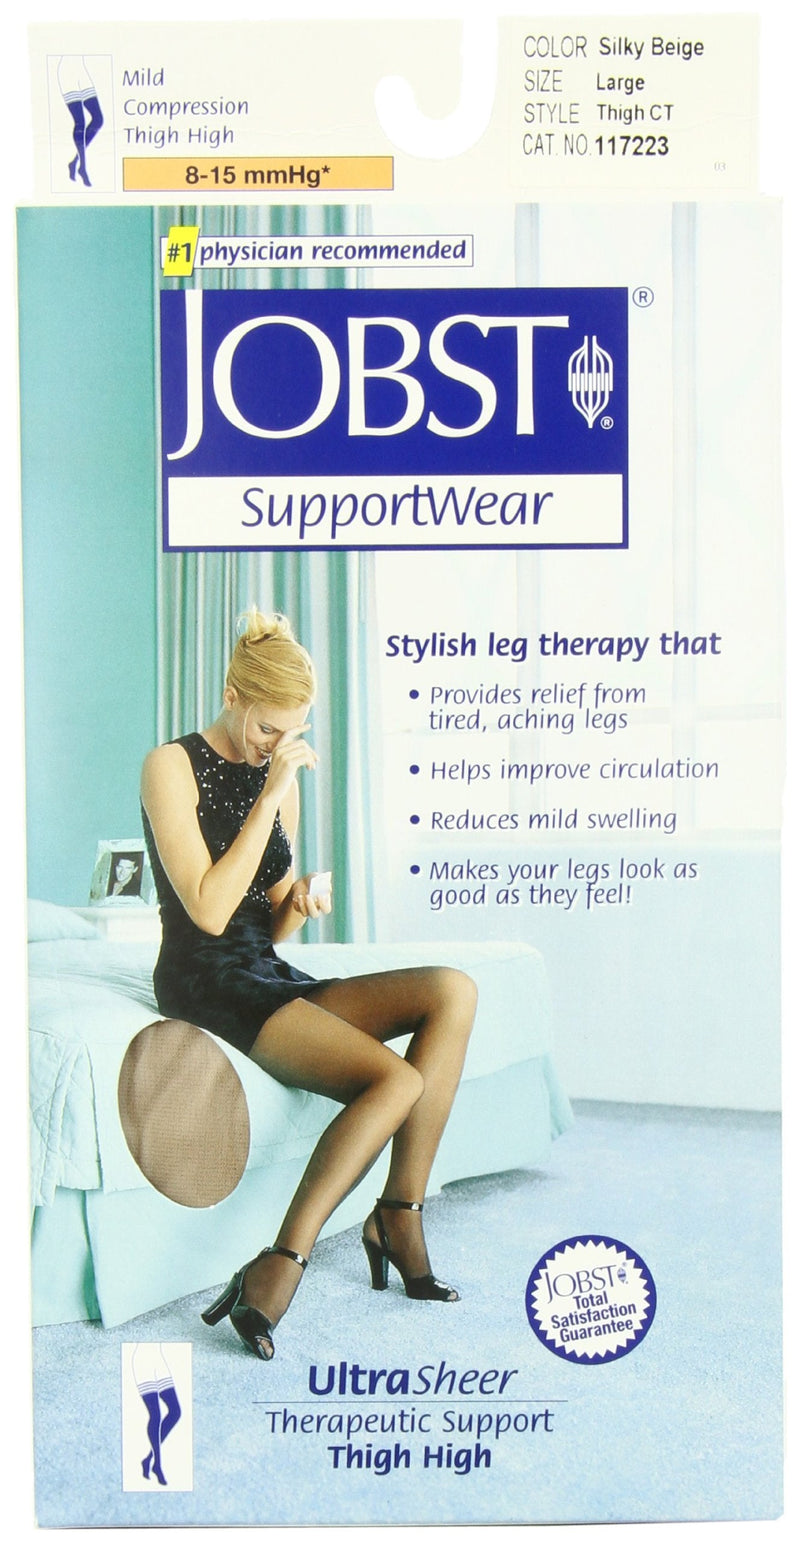 [Australia] - JOBST UltraSheer Support Compression Stockings 8-15 mmHg* Large Silky Beige Close-Toe 1 Each 